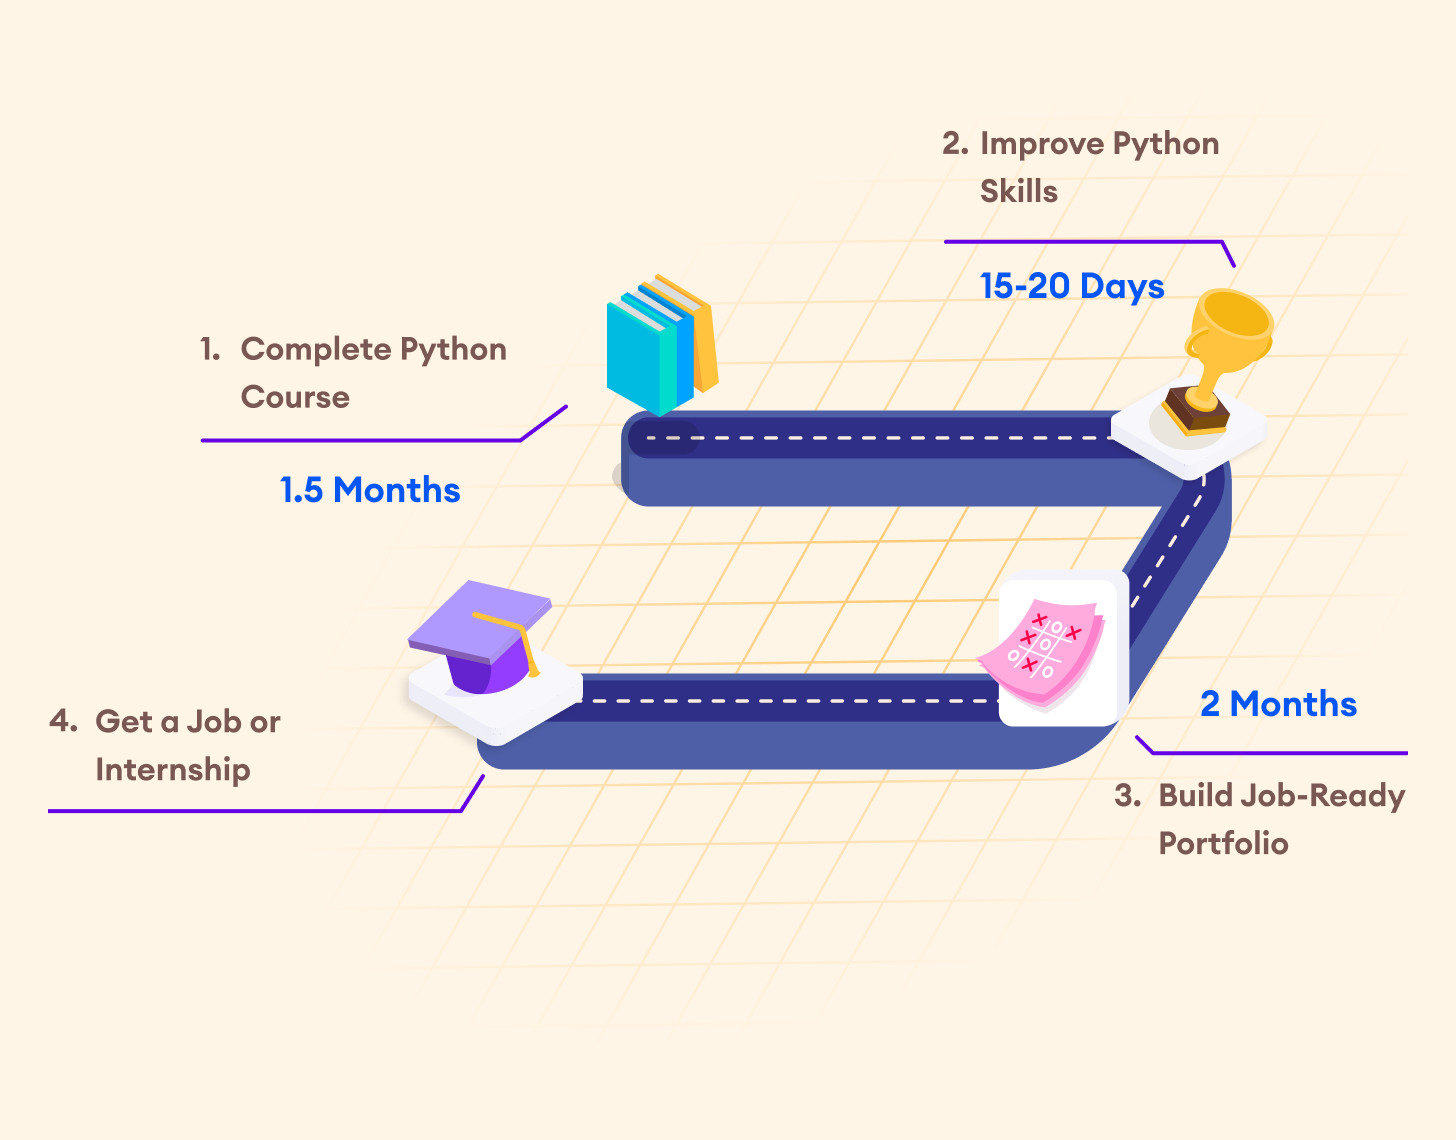 Timeline to Learn Python